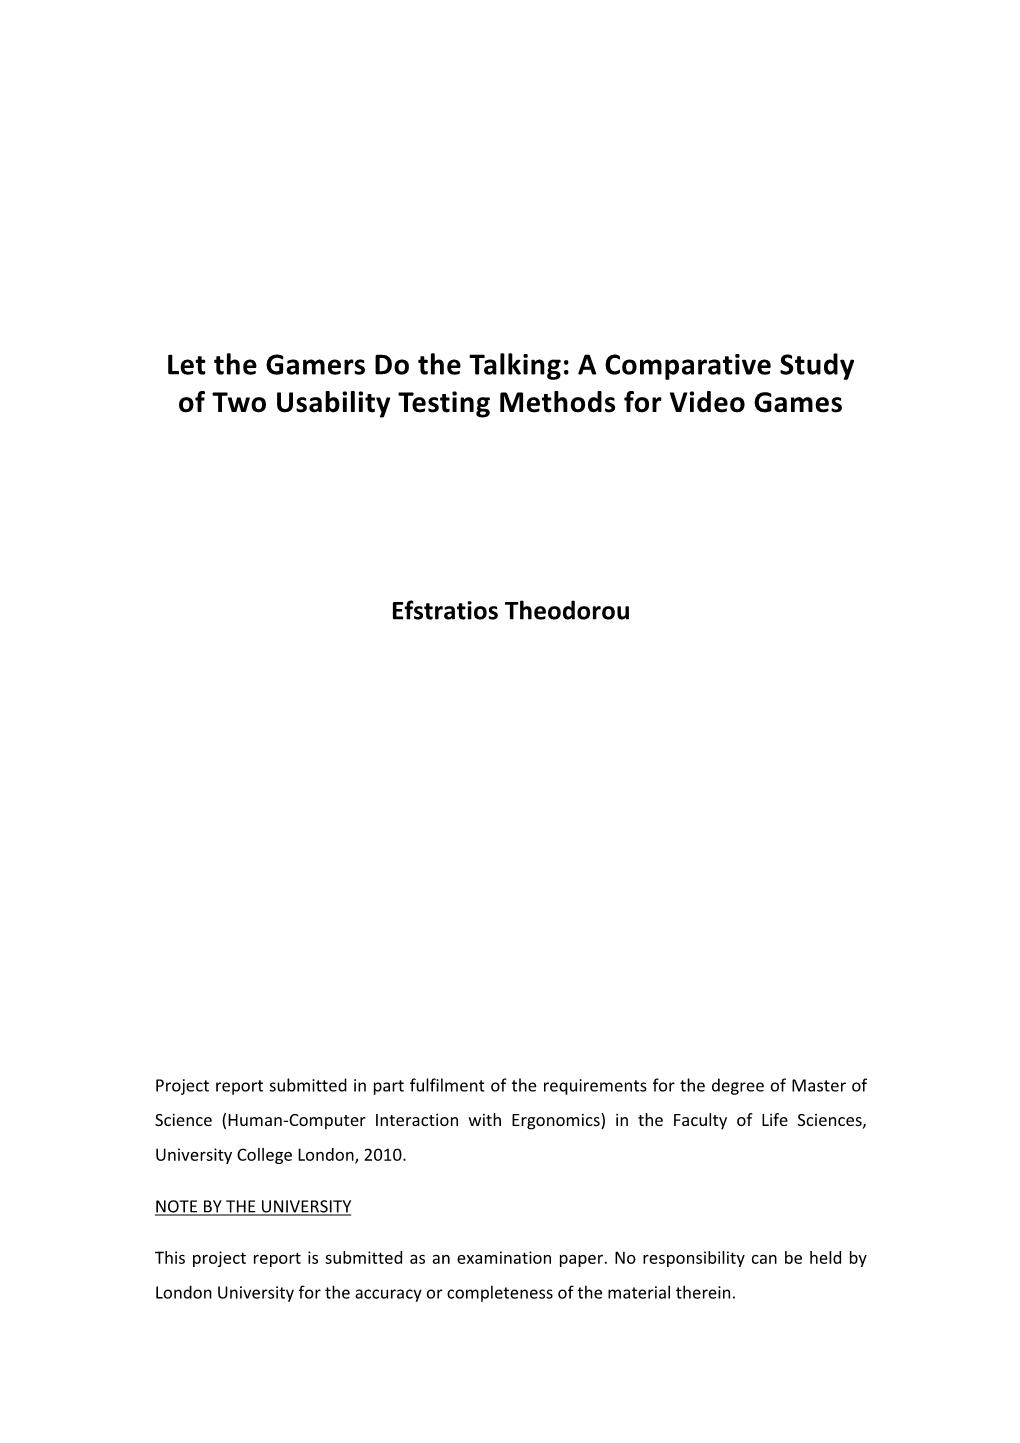 A Comparative Study of Two Usability Testing Methods for Video Games